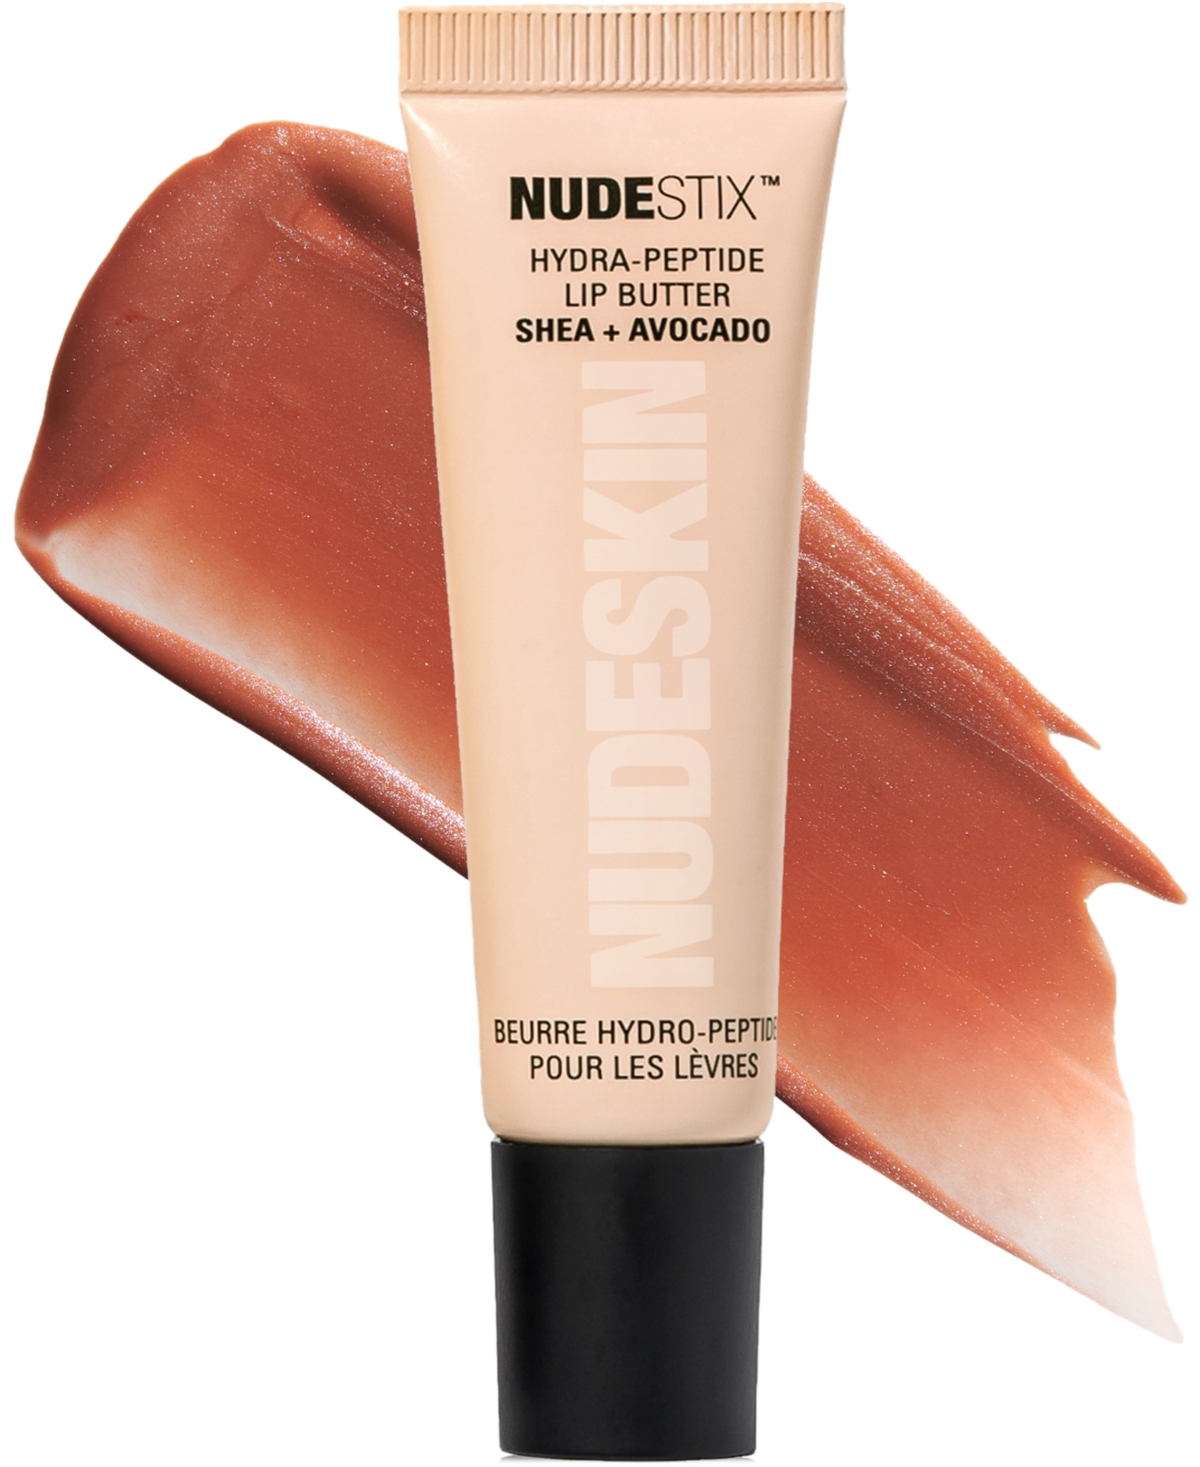 Nudeskin Hydra-Peptide Lip Butter - Dolce Nude (Shimmer Tint Gloss With A Ca